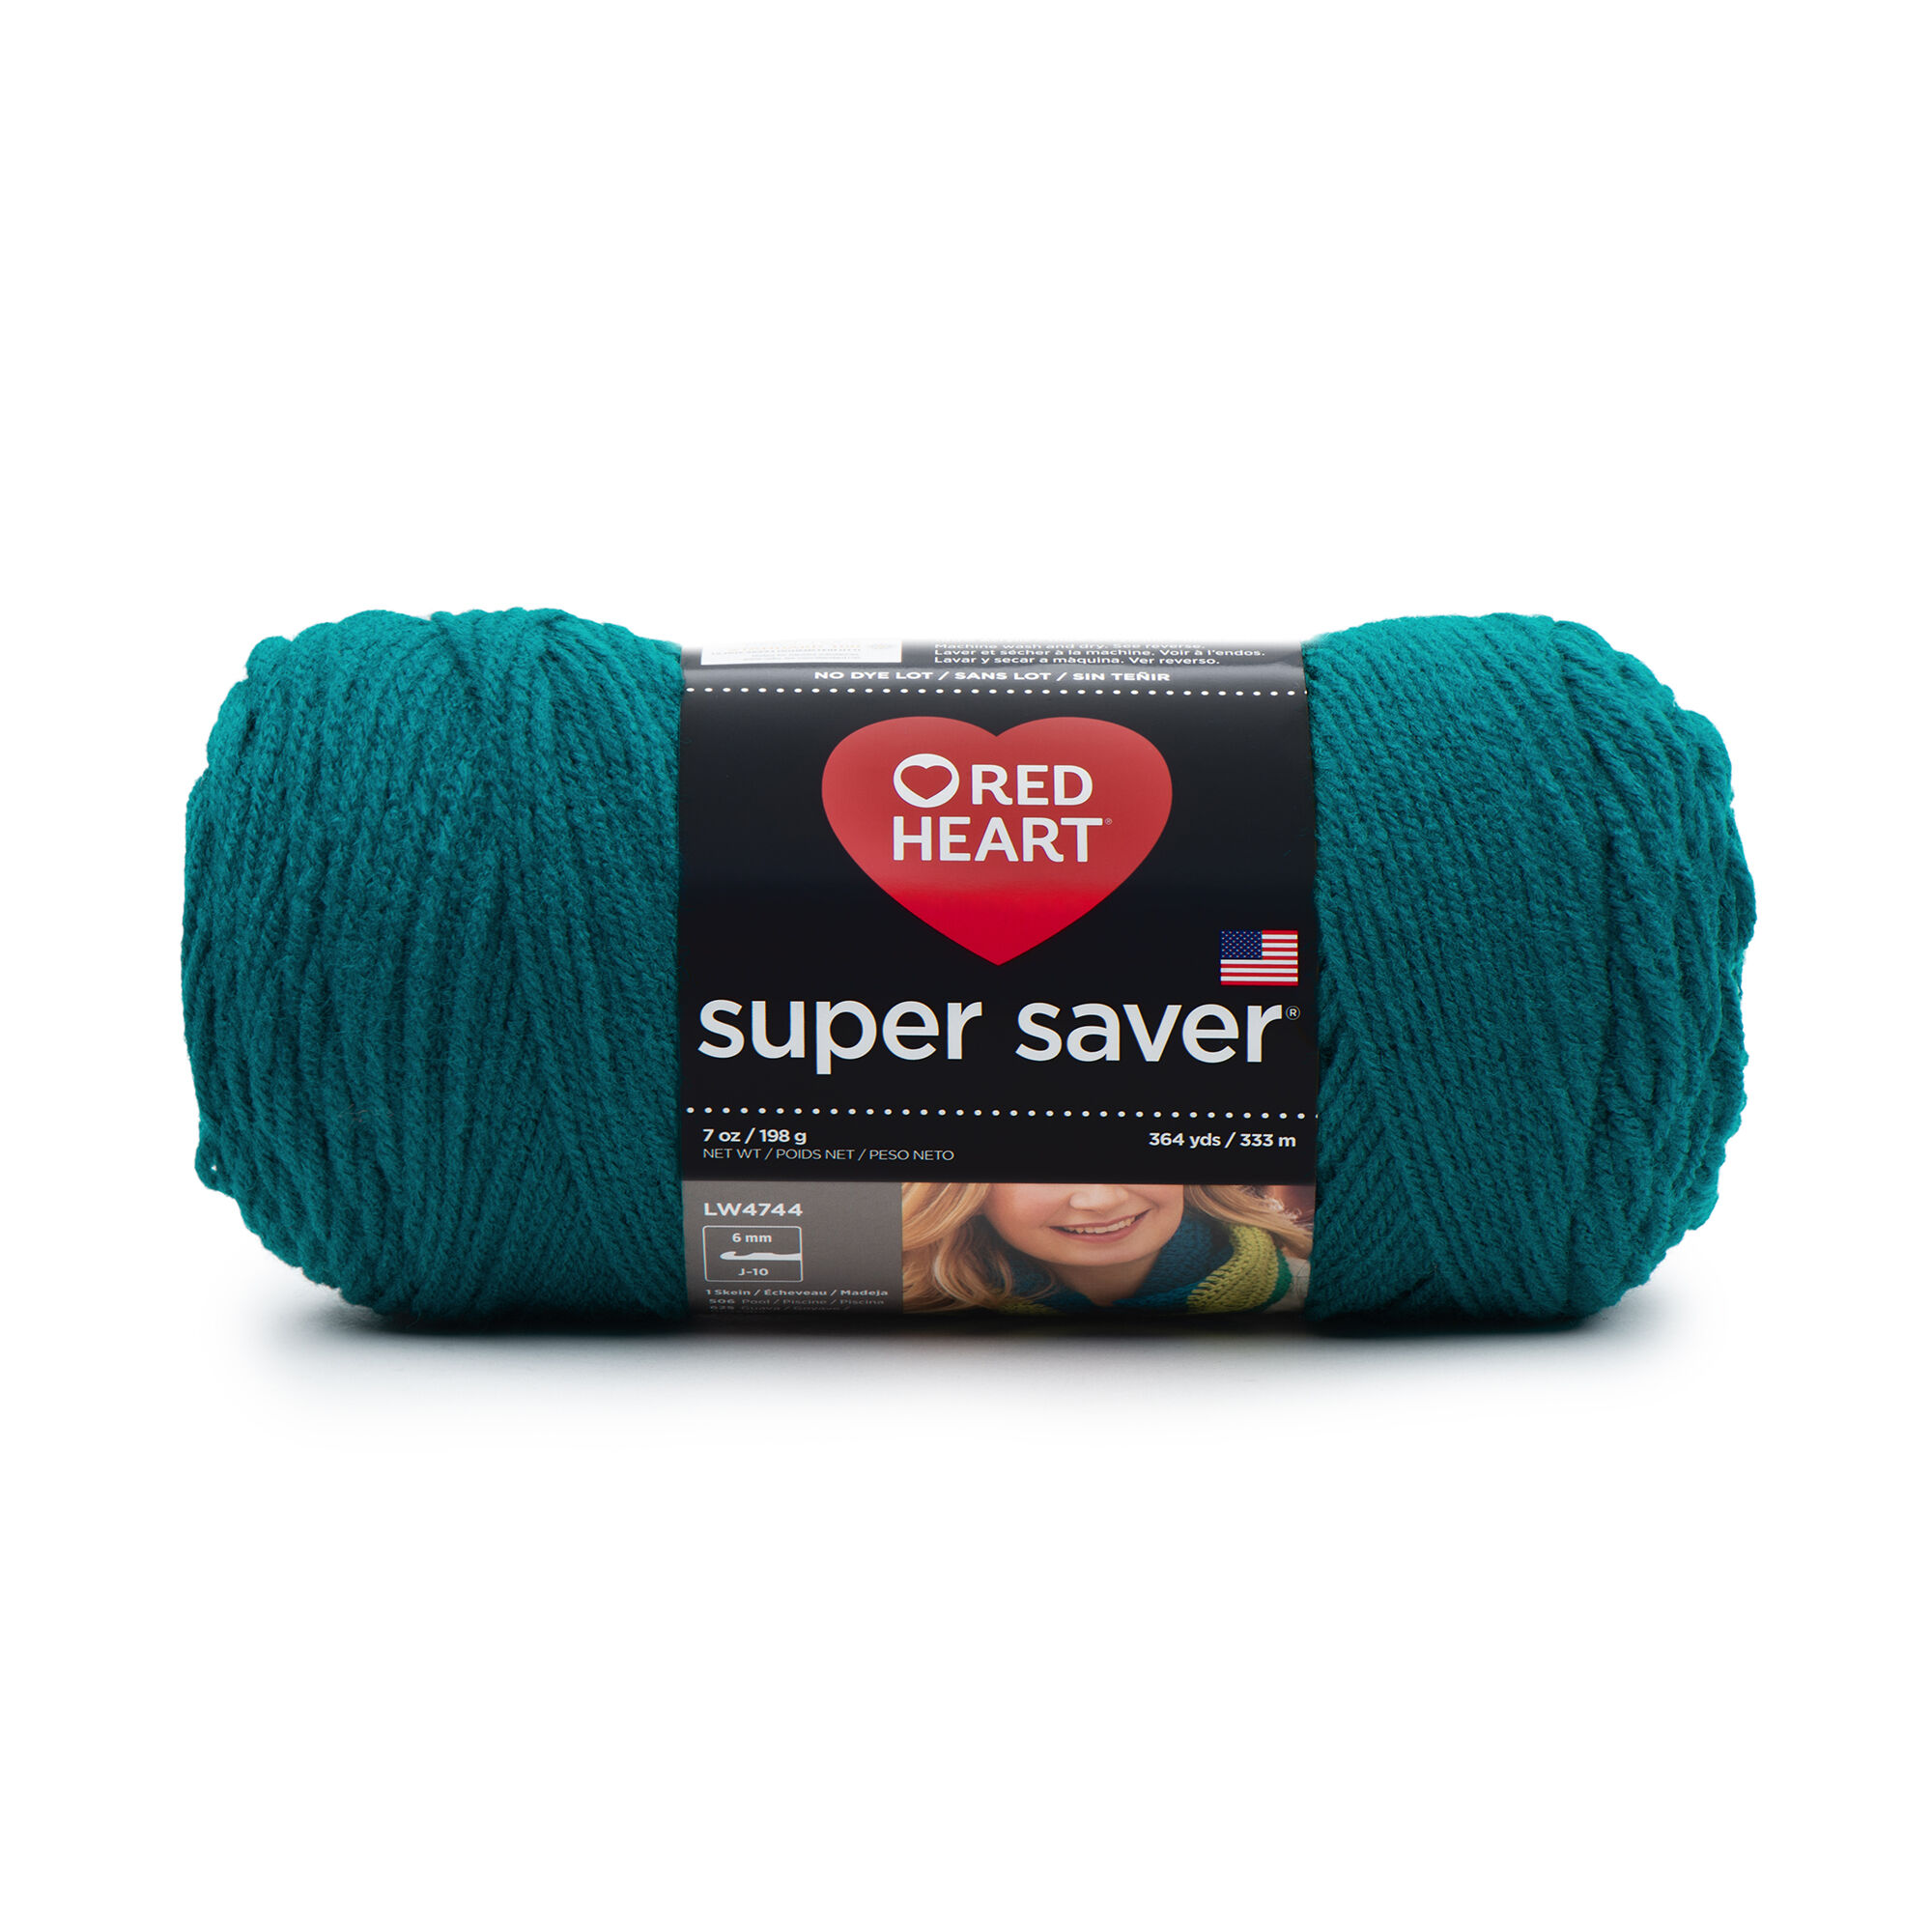 RED HEART SUPER SAVER ECON REAL TEAL - image 1 of 14